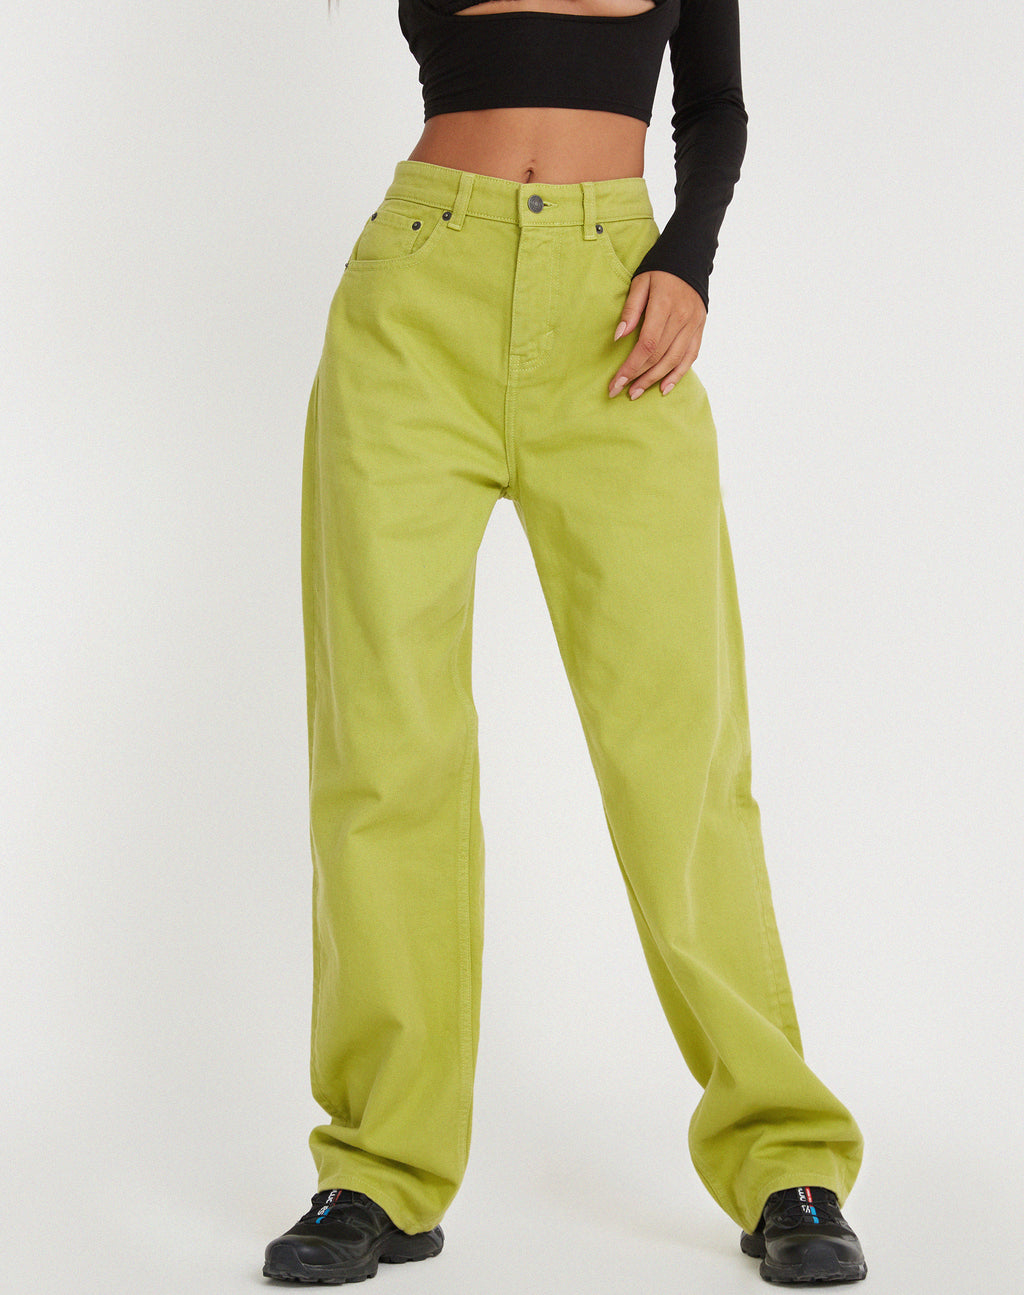 Parallel Jeans in Green Oasis